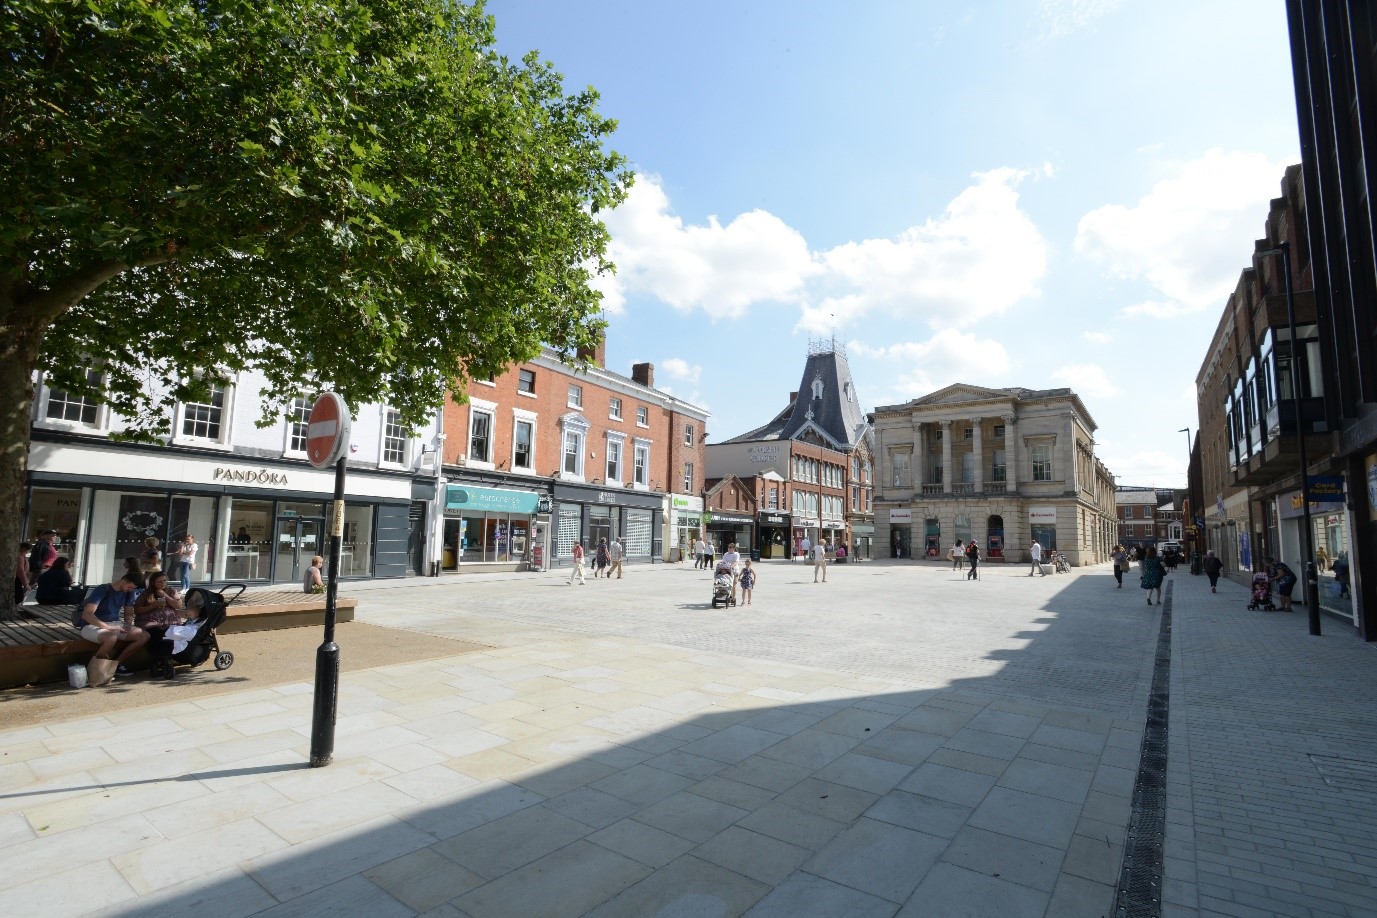 New paving and street furniture at Cornhill Quarter